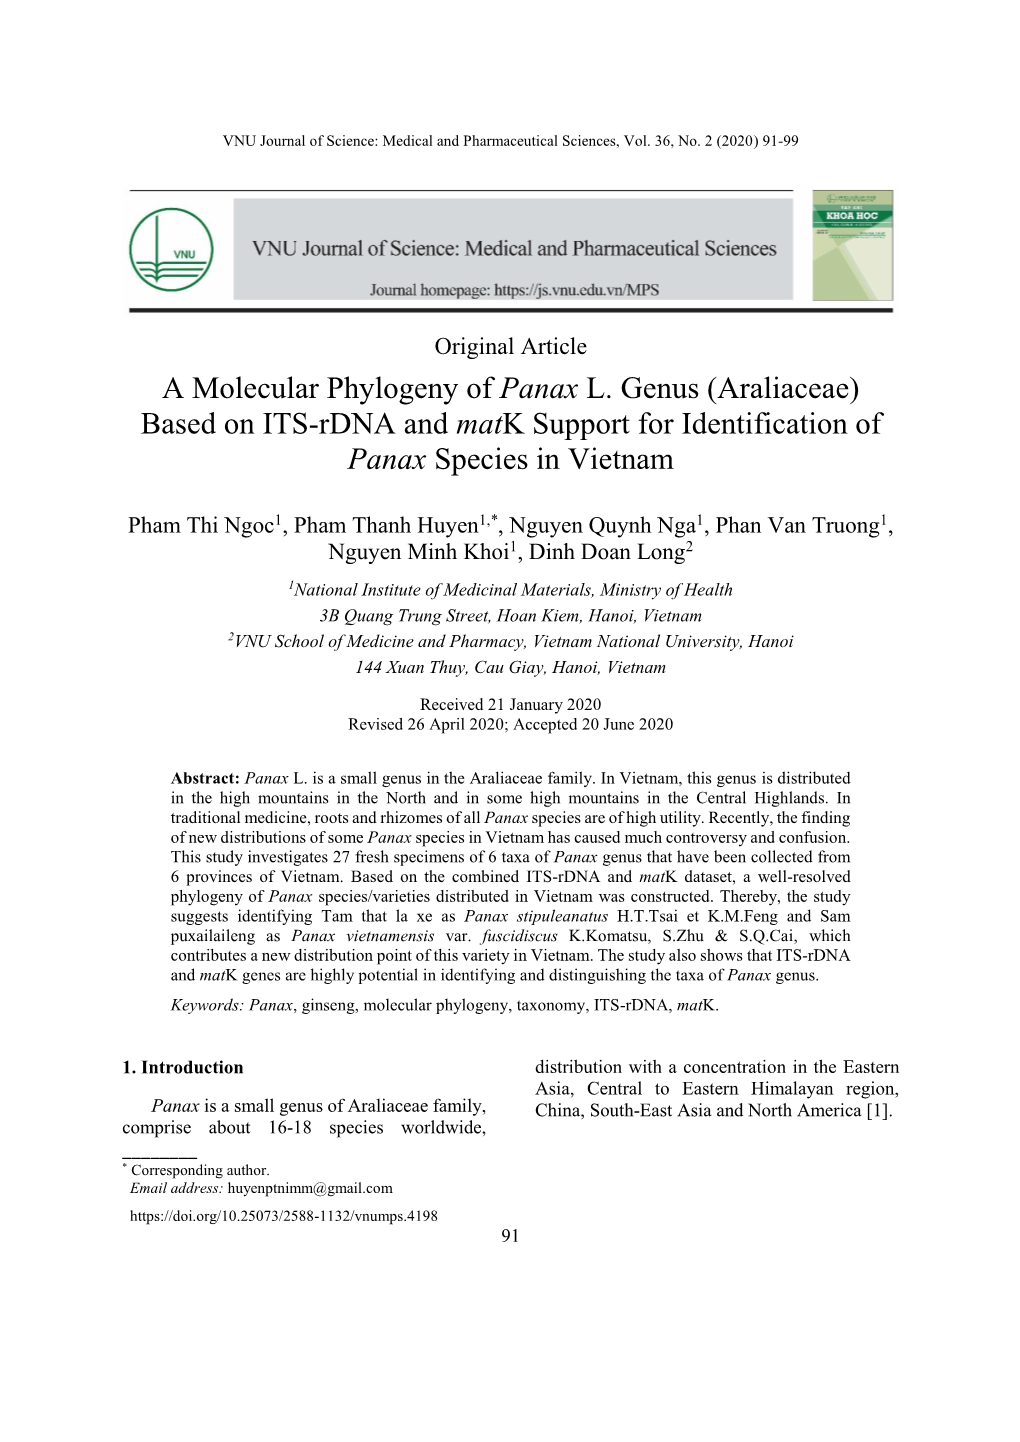 A Molecular Phylogeny of Panax L. Genus (Araliaceae) Based on ITS-Rdna and Matk Support for Identification of Panax Species in Vietnam